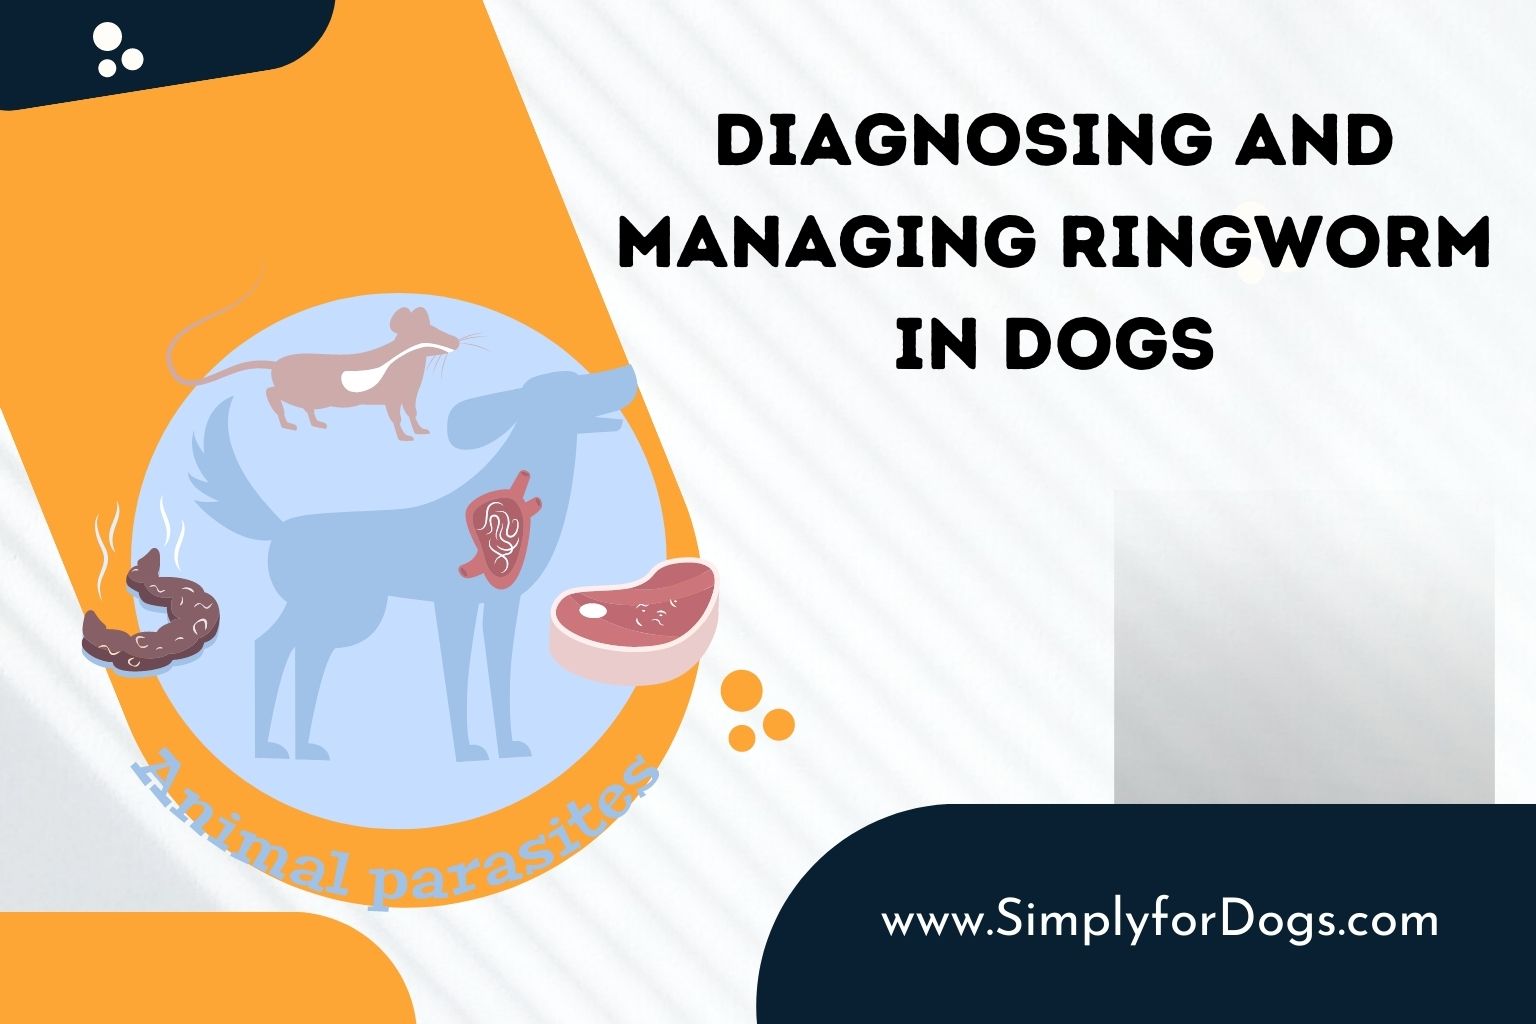 Diagnosing and Managing Ringworm in Dogs